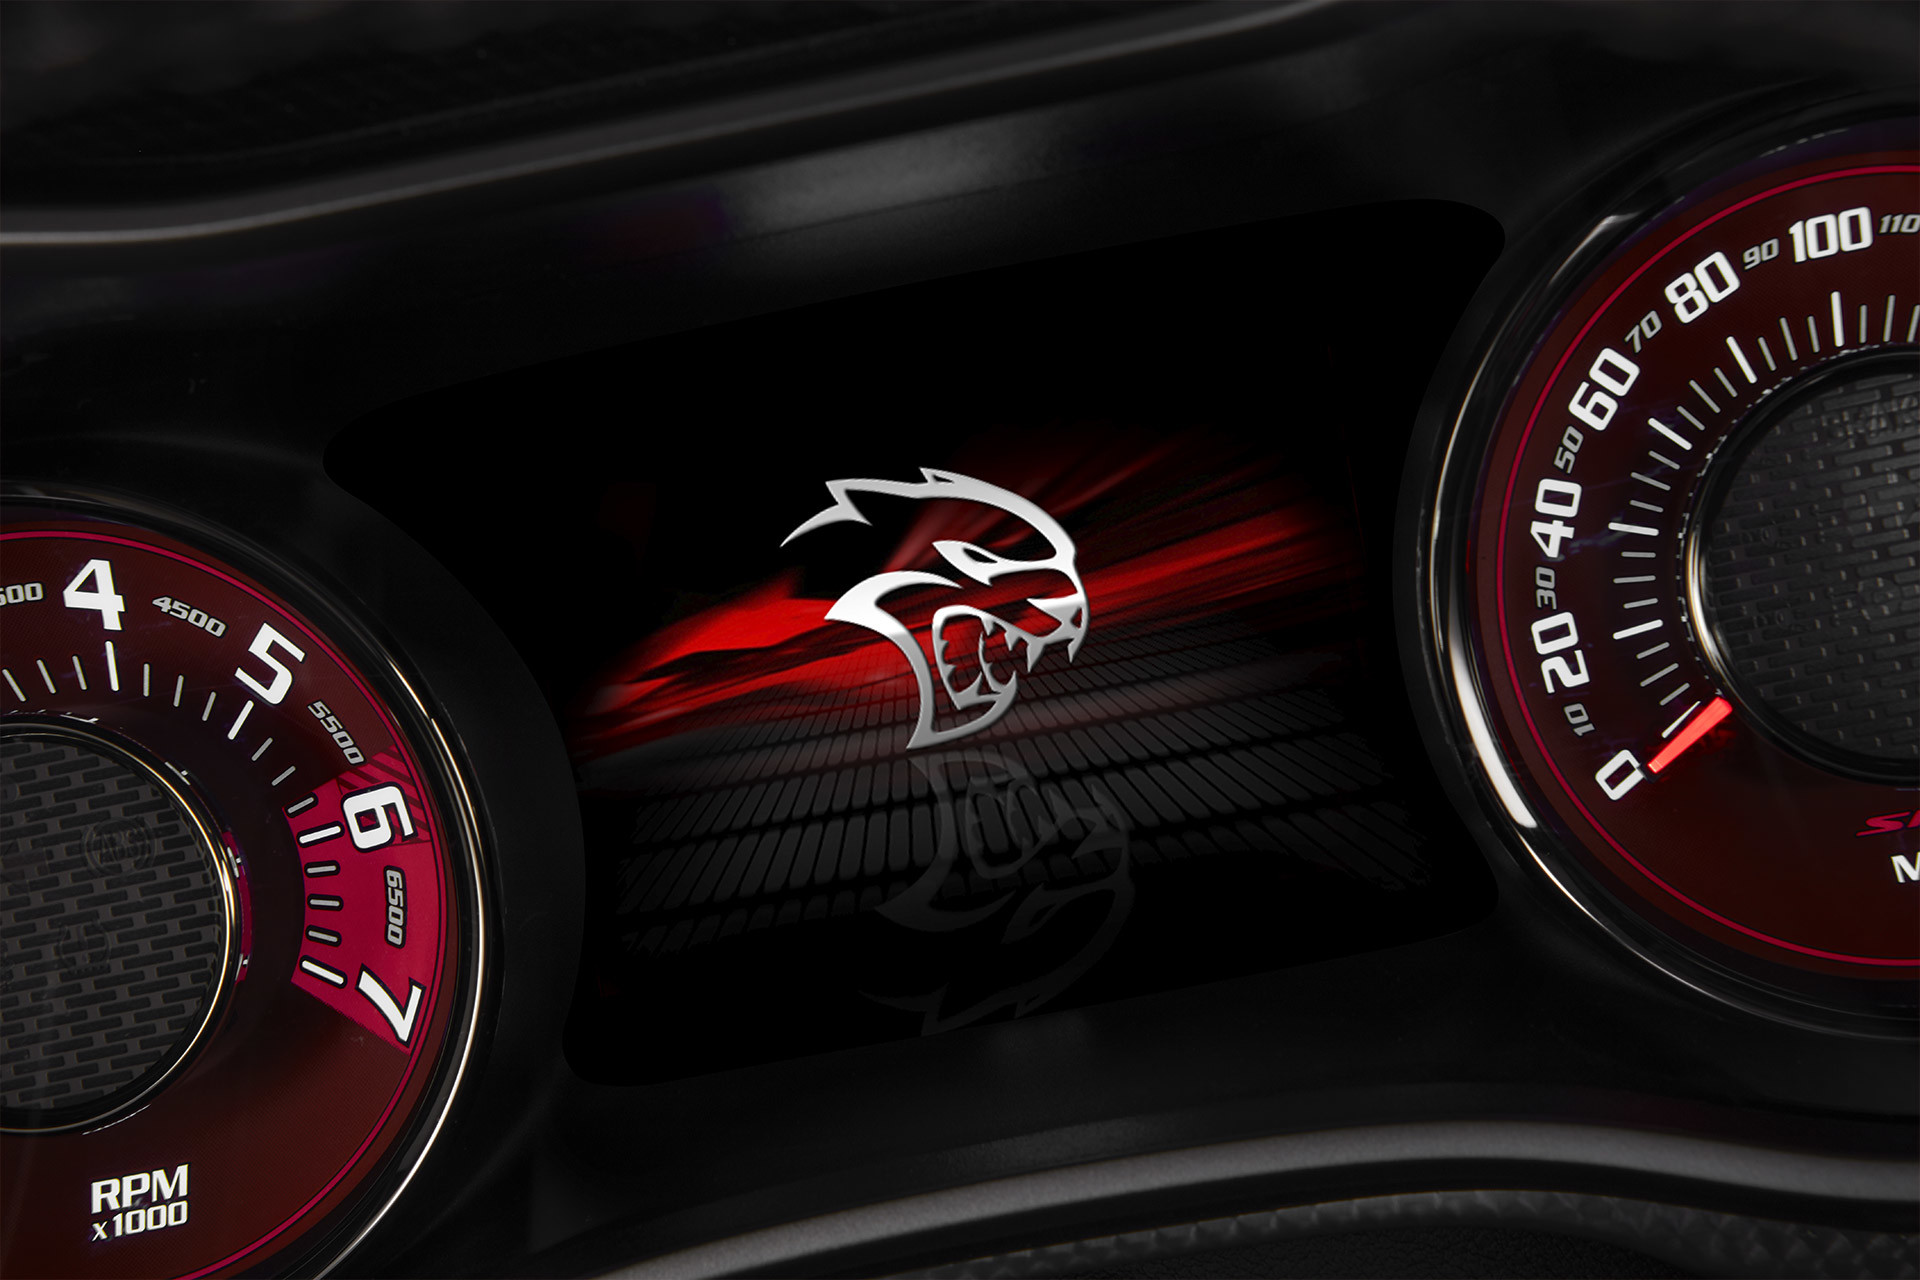 The 7-inch full-colour in-cluster display of a 2022 Dodge Challenger, displaying the SRT Hellcat Redeye splash screen.